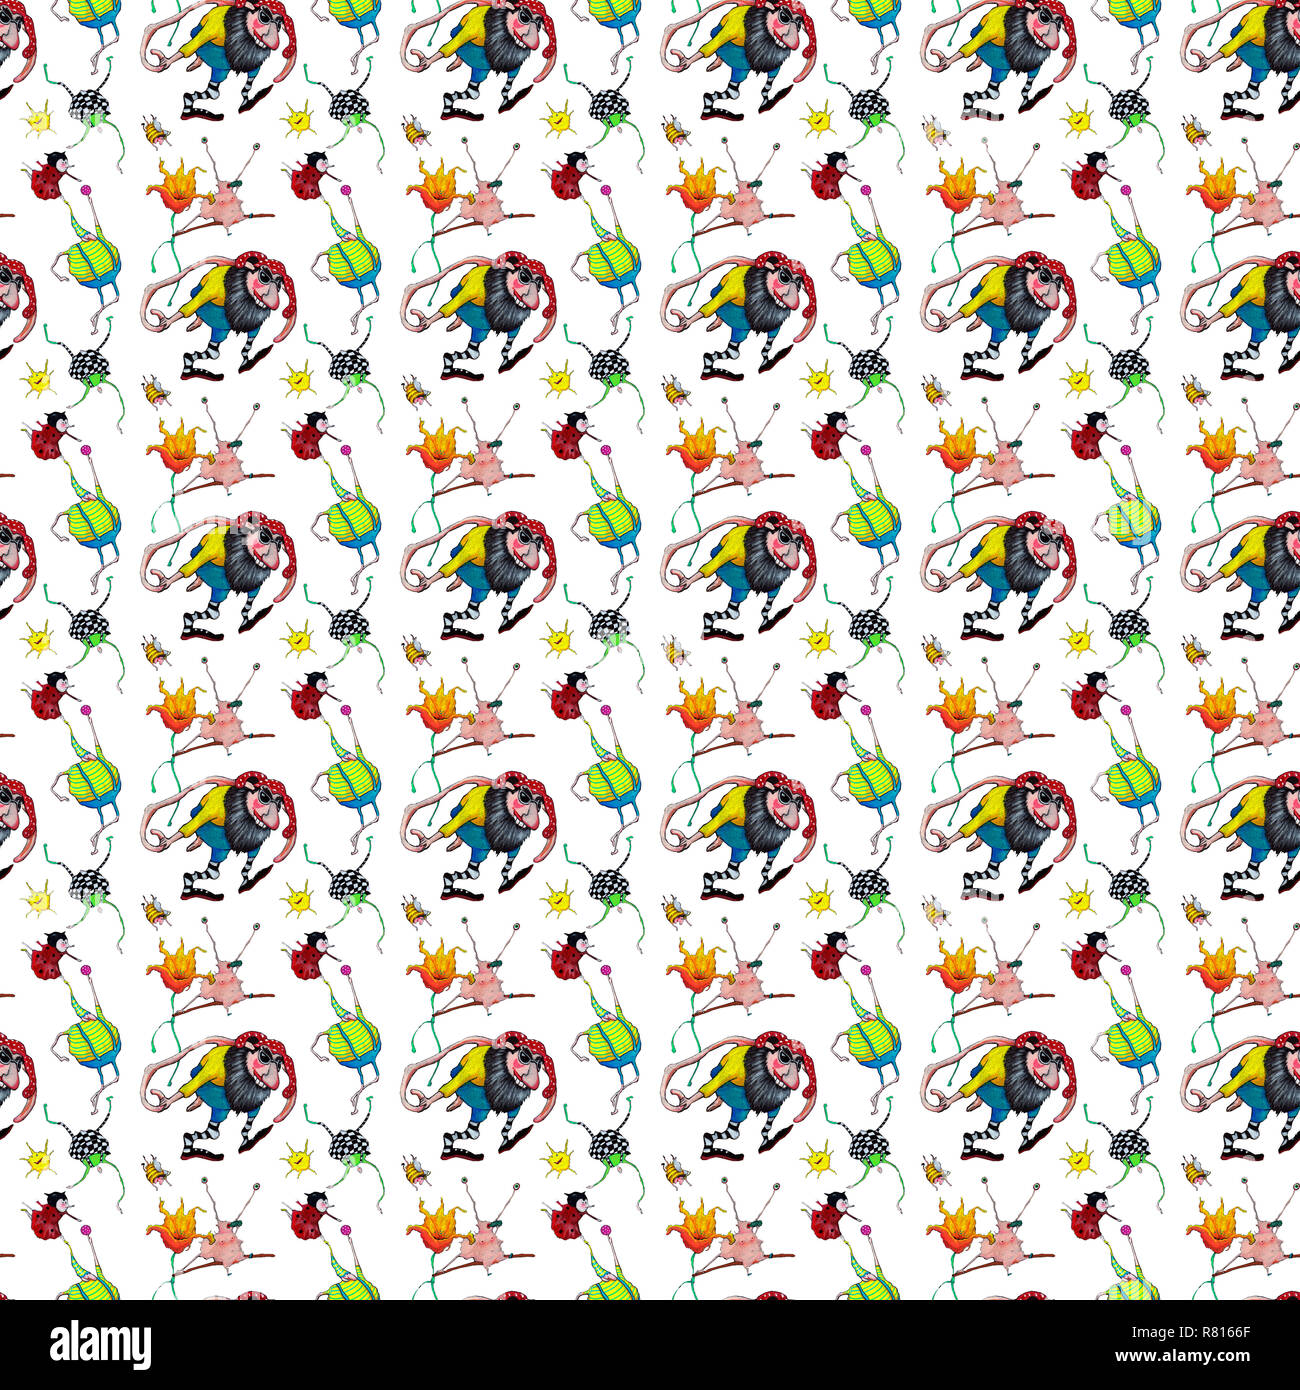 Wallpaper, wrapping paper, seamless pattern, with fantasy creatures, dwarves and beetles, Germany Stock Photo